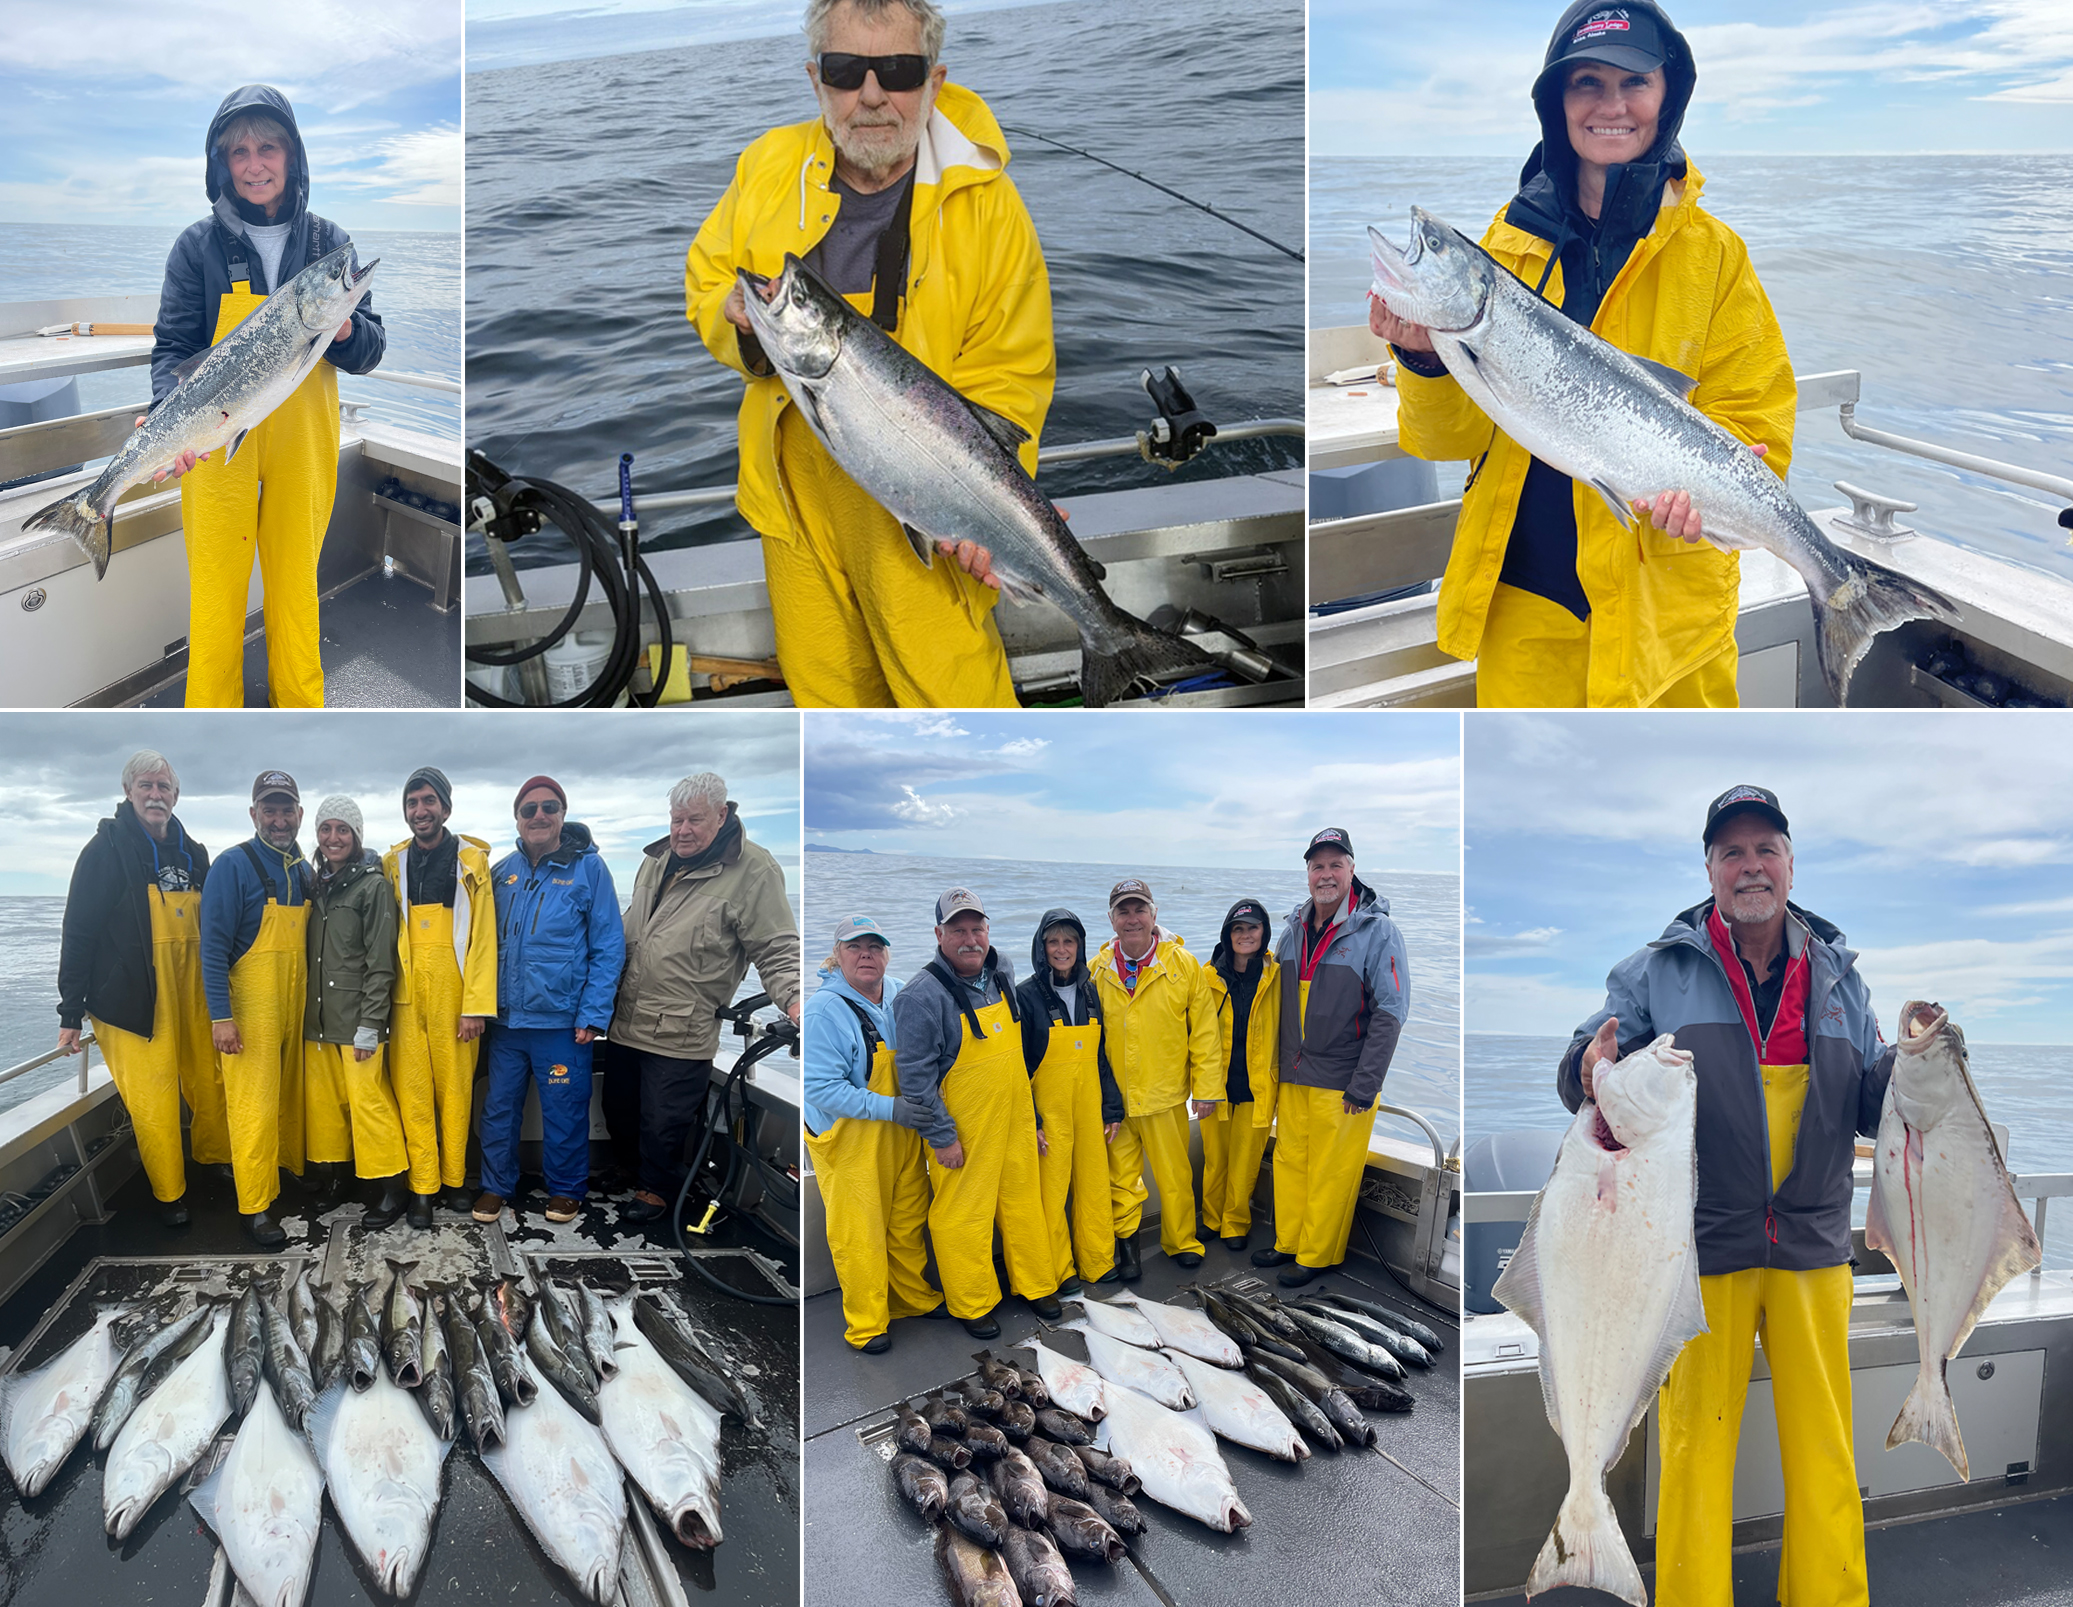 7-12-22 Sunny skies and more fine fishing!